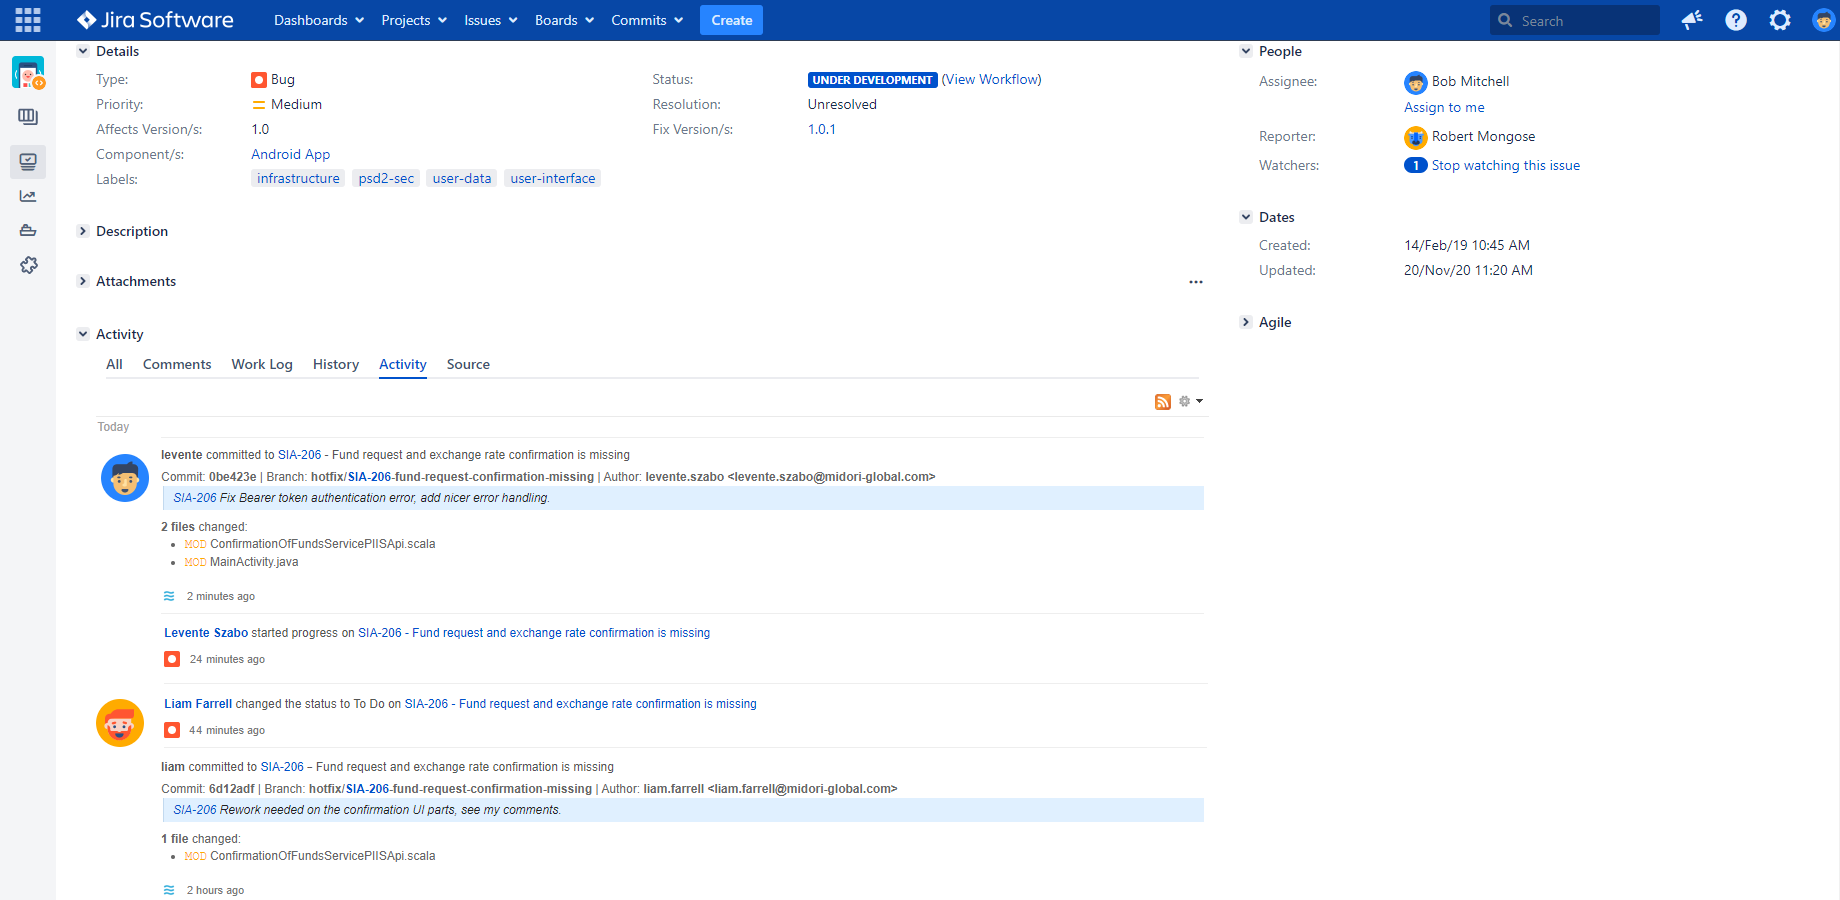 Code commit information posted in the activity stream tab of a Jira issue